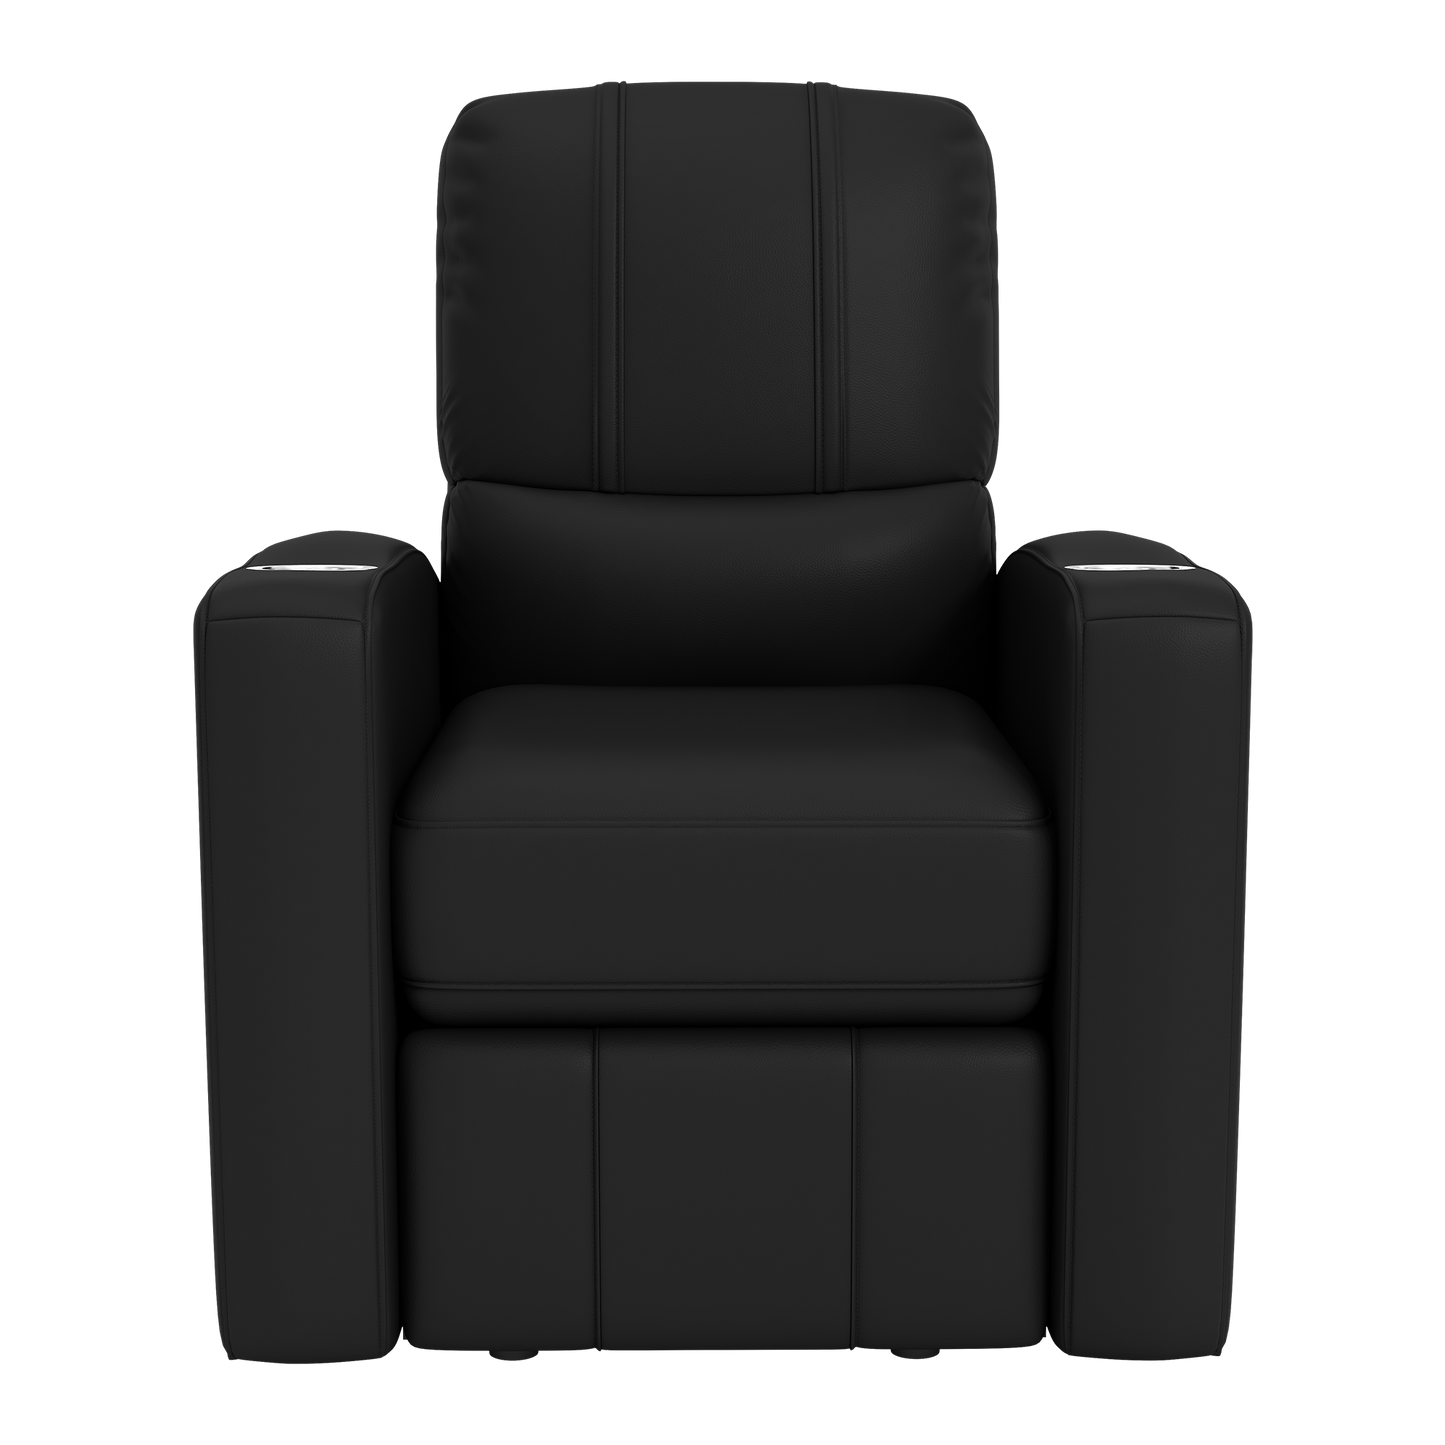 Stealth Recliner with New York Islanders Logo